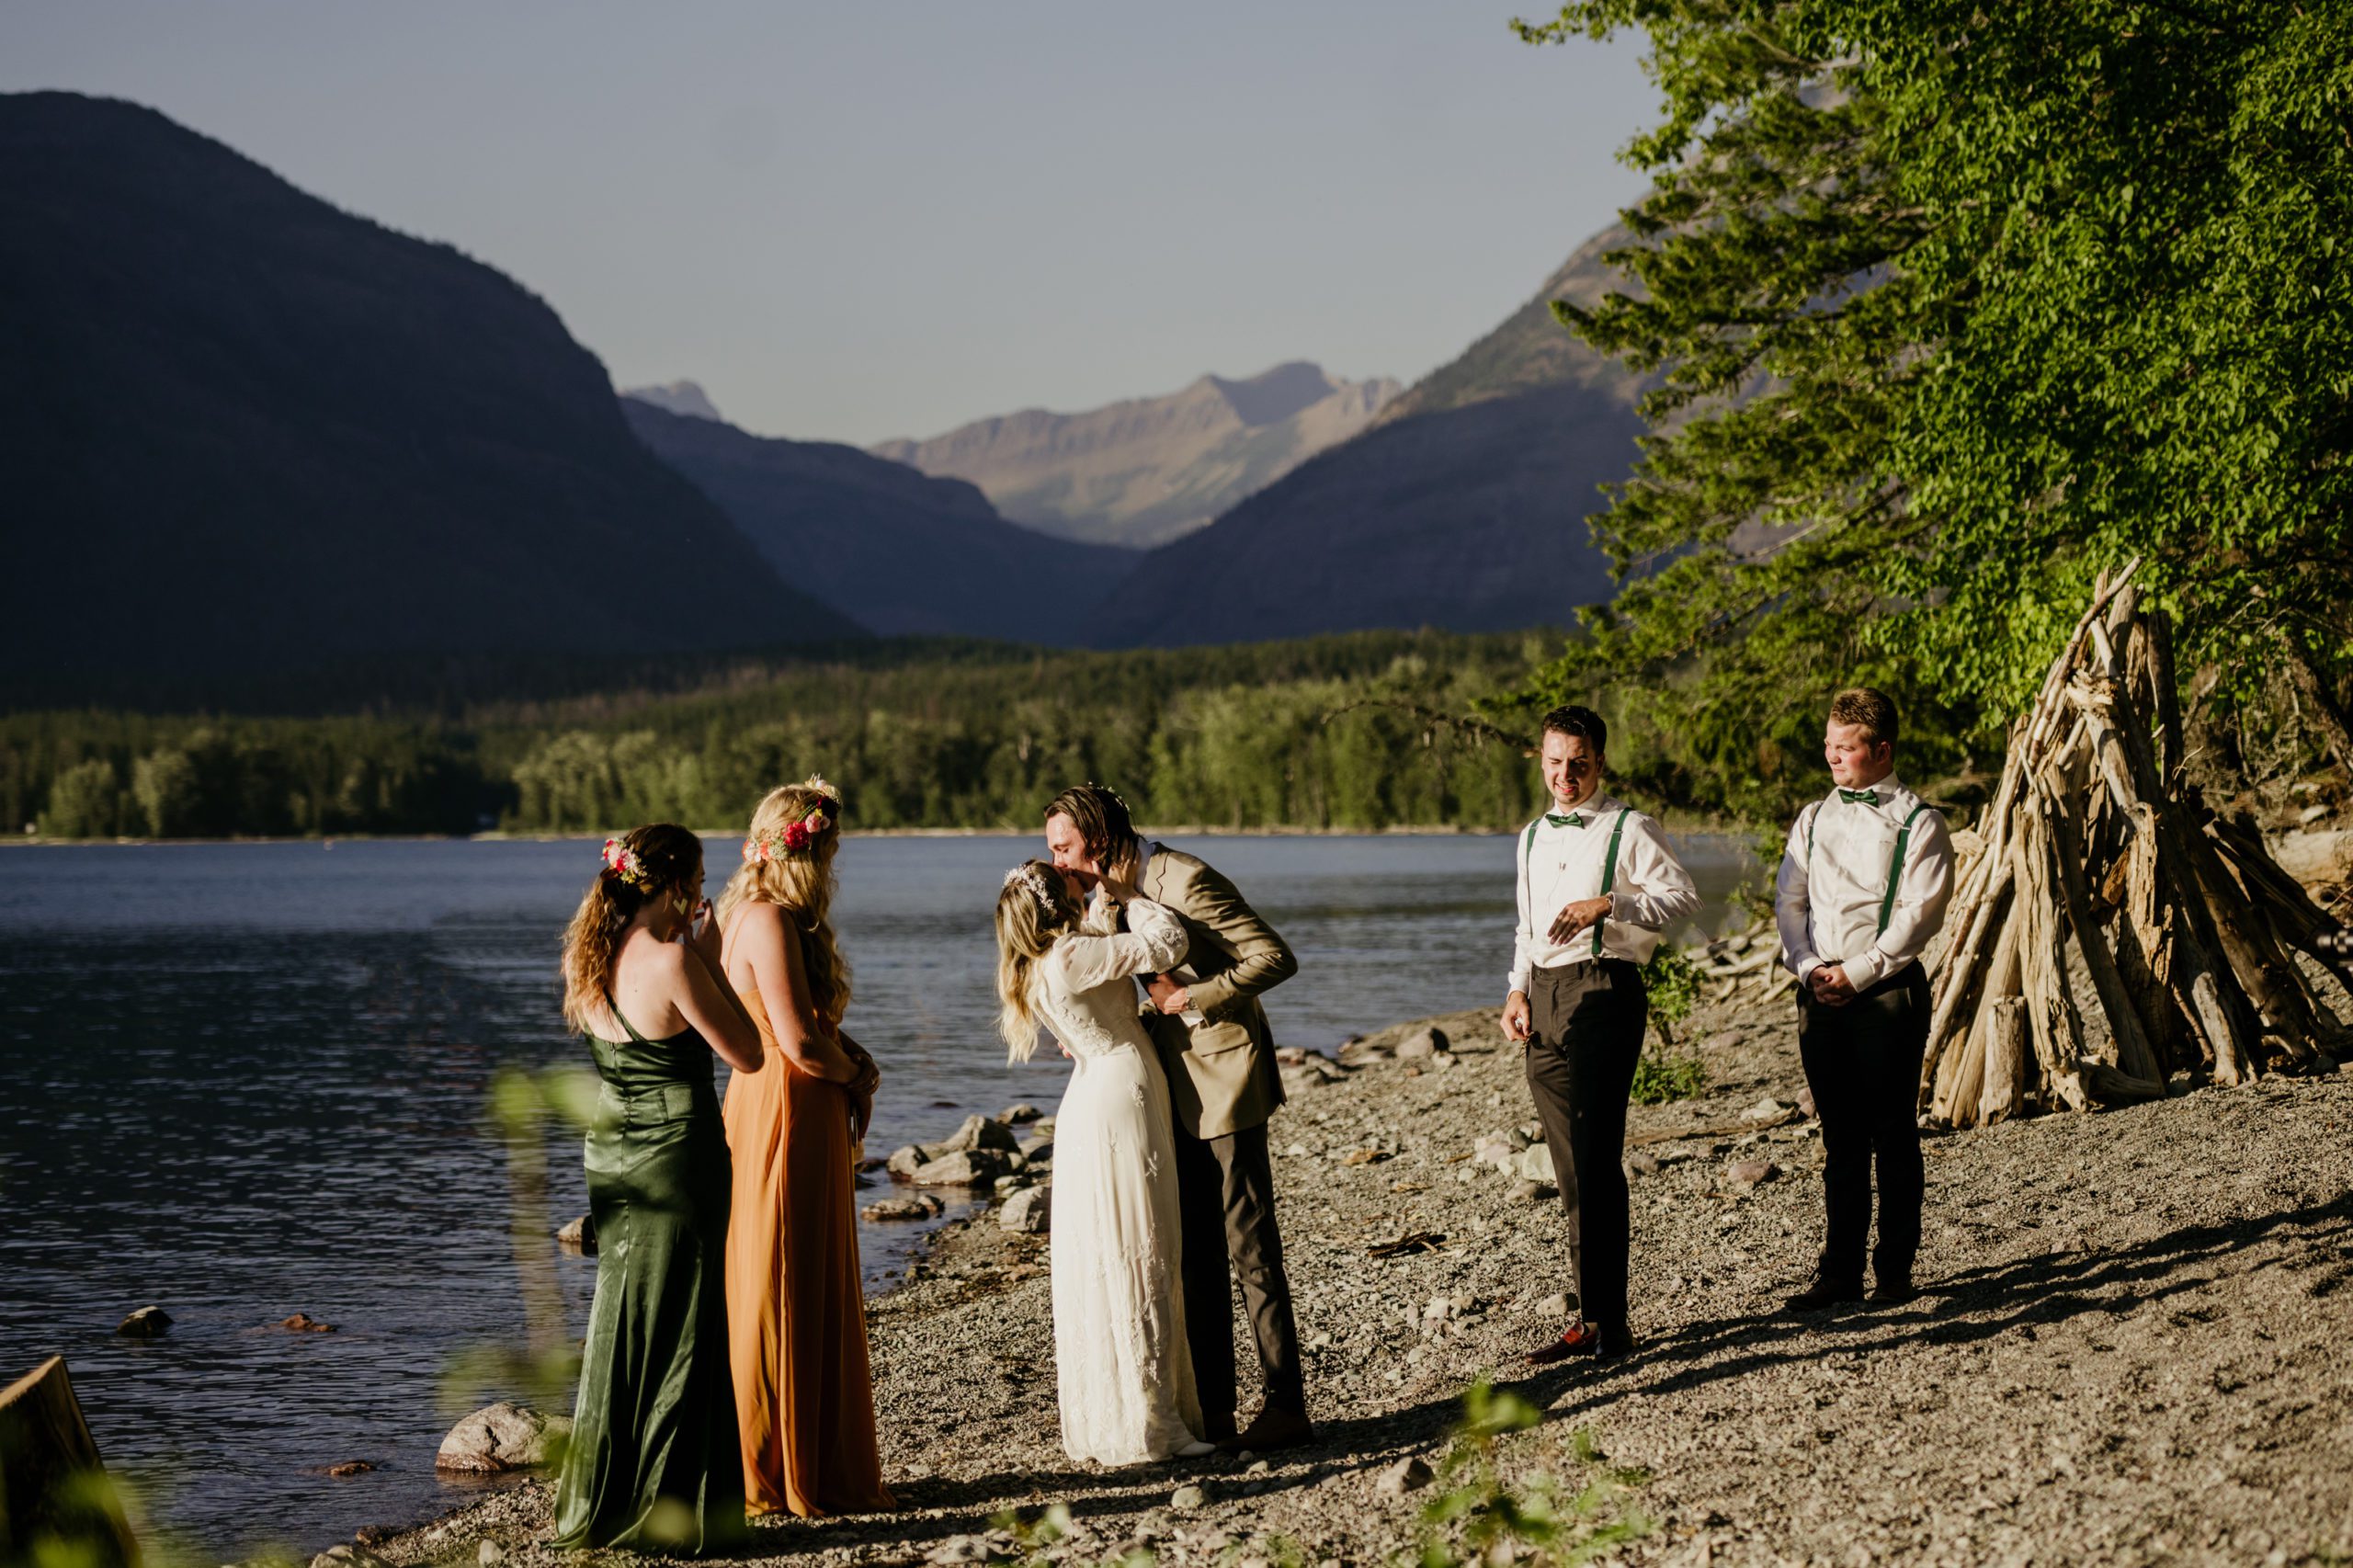 Glacier National Park micro wedding. Wedding photos on Lake McDonald. The best place for photos in Glacier National Park. Small wedding in Glacier - invite your friends and family to your wedding. Where can you get married in Glacier? 